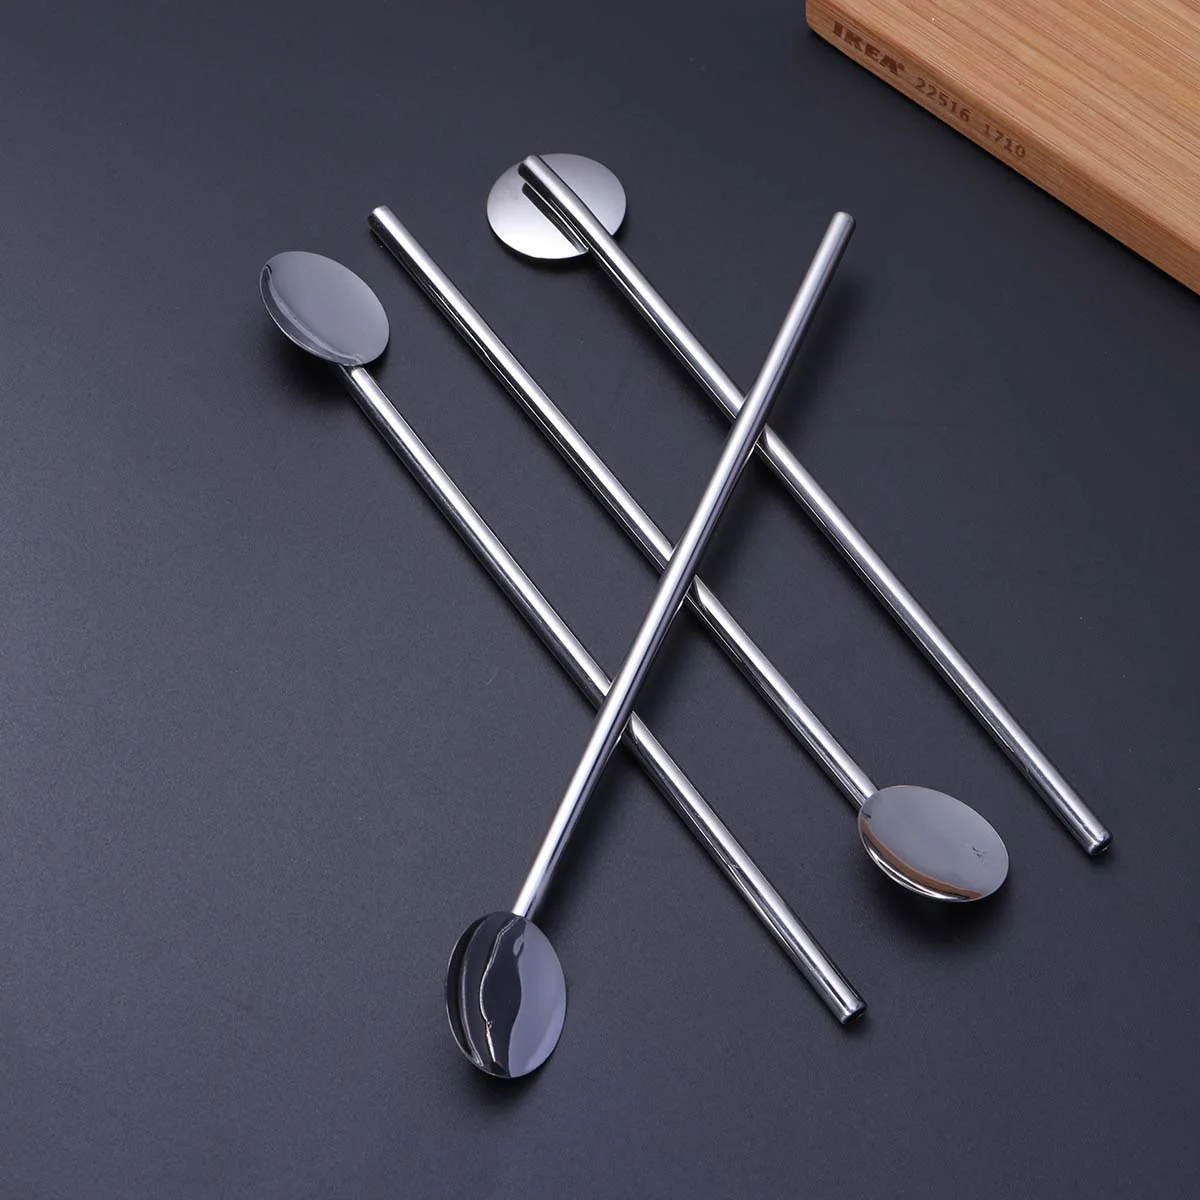 

6 Pcs/Pack Stainless Steel Round Shape Metal Drinking Spoon Straw Reusable Straws Cocktail Spoons Set Tubes